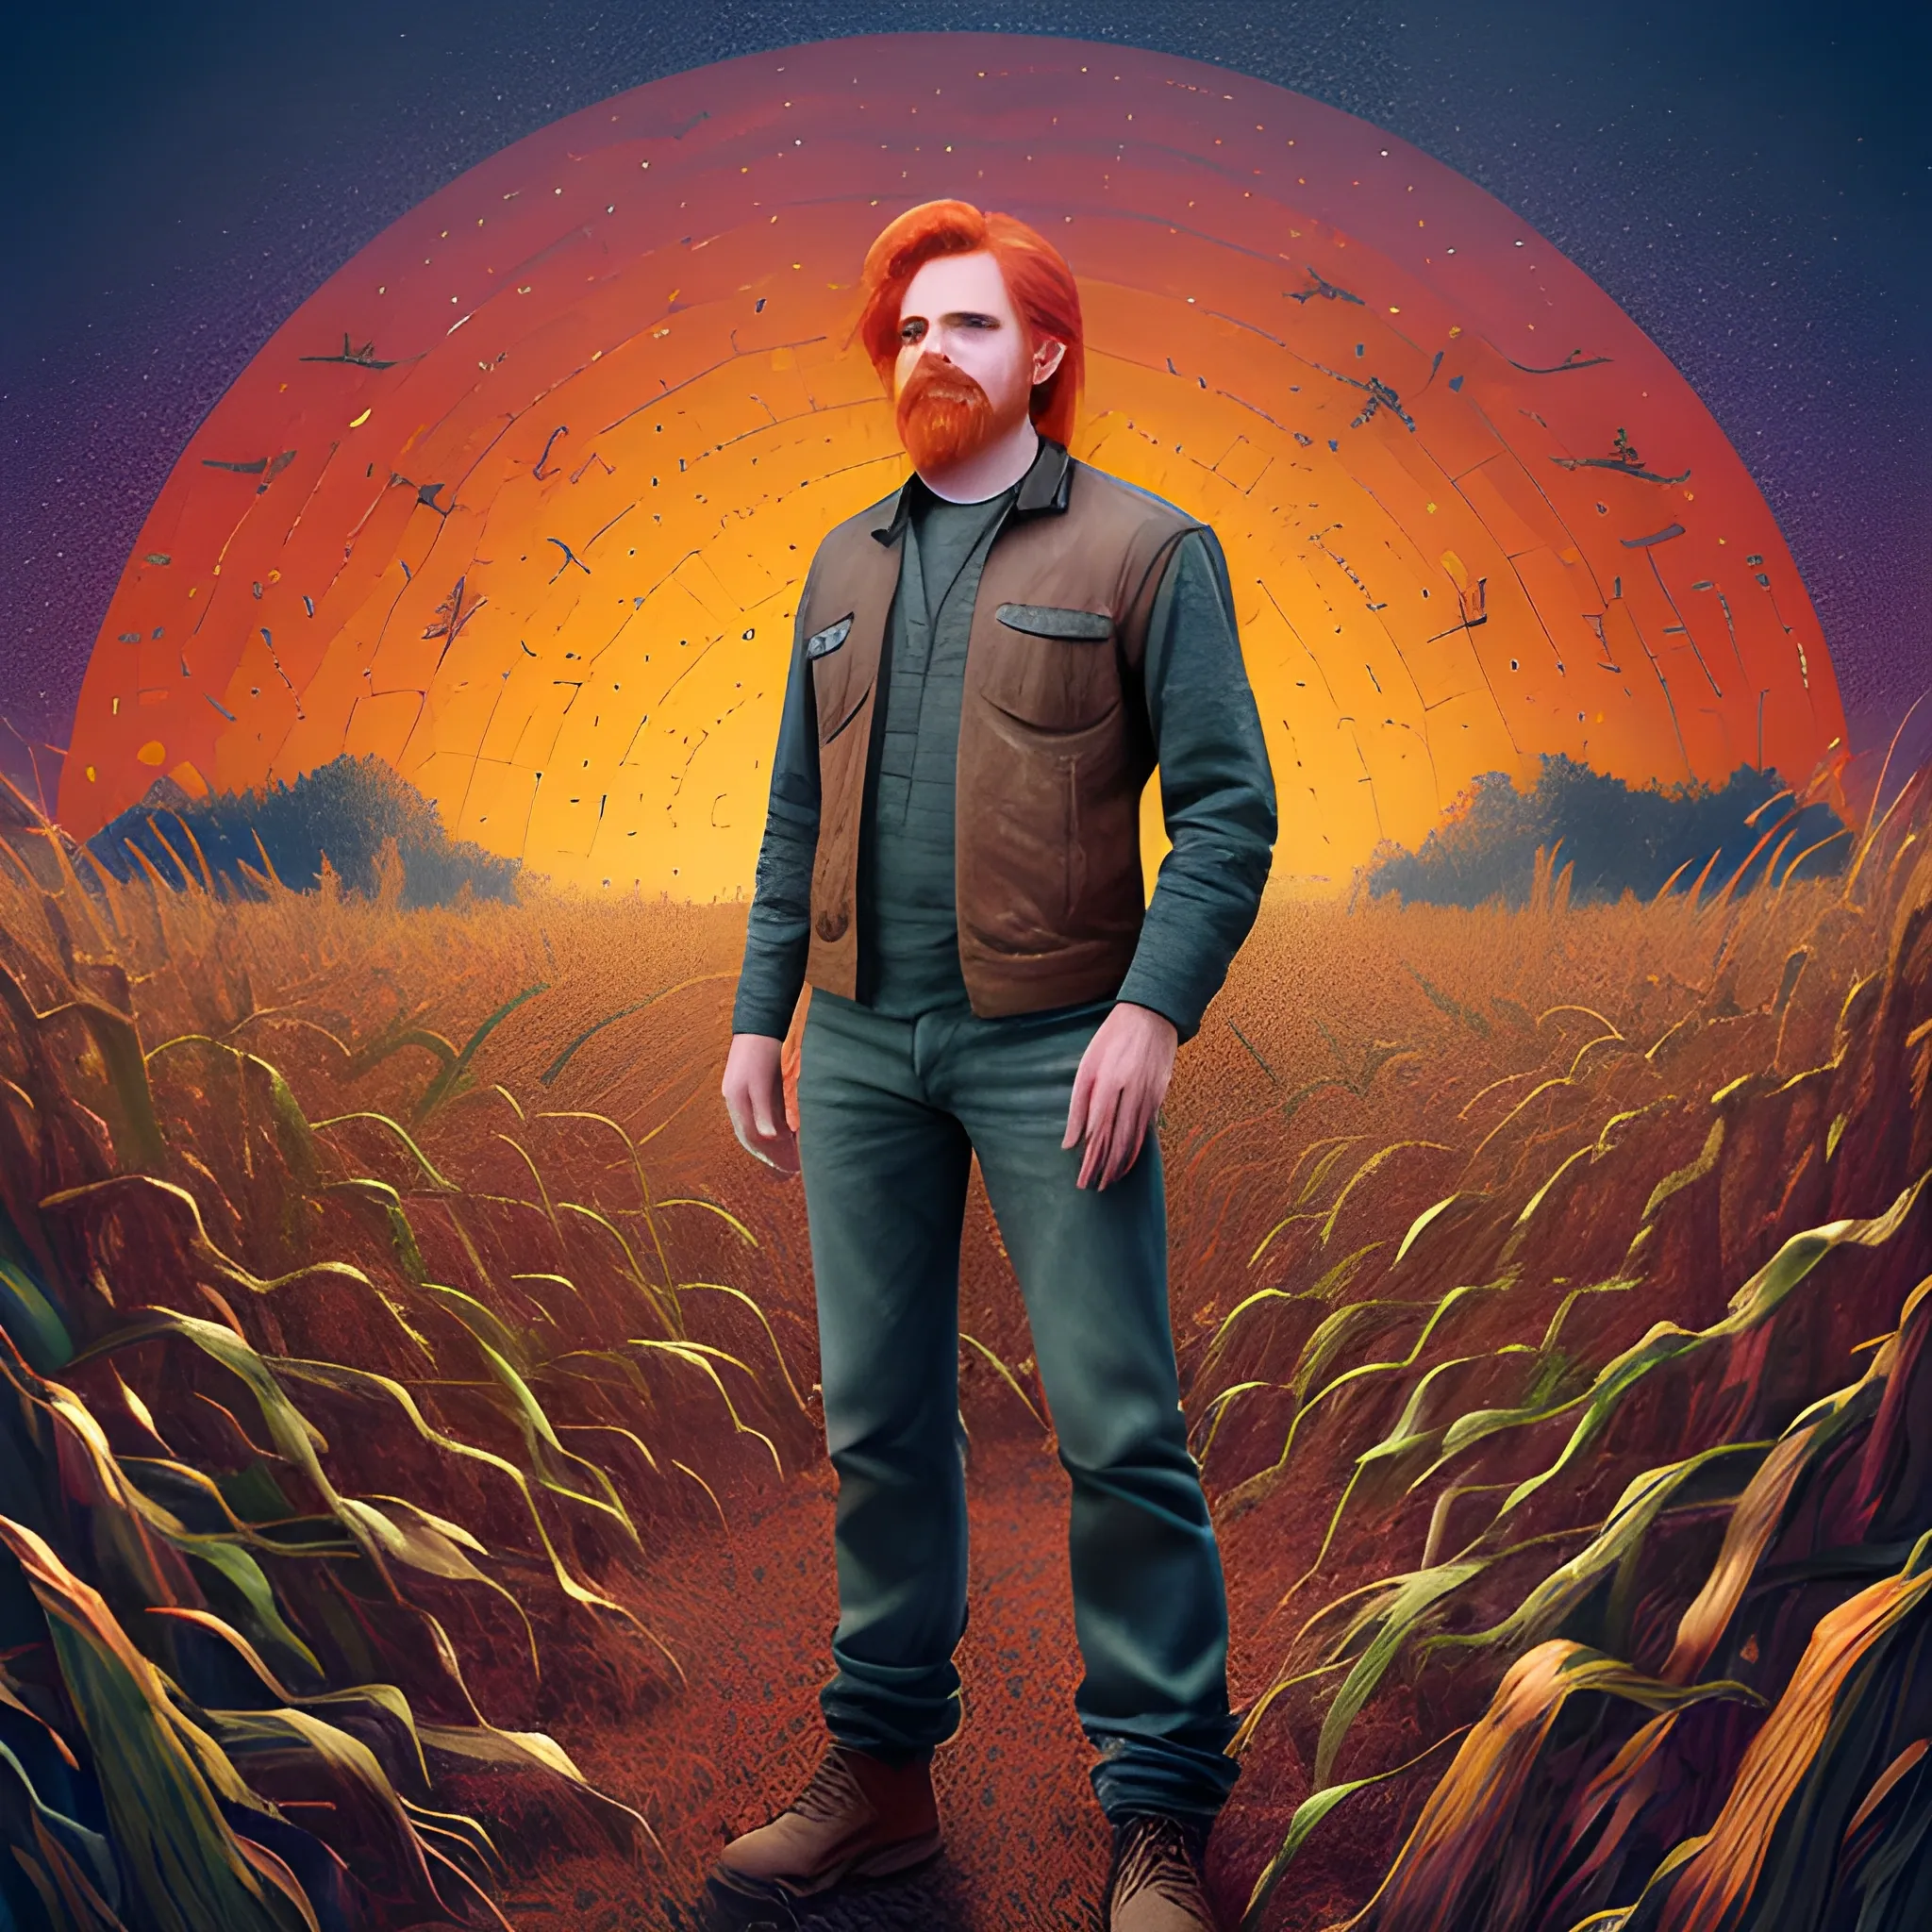 male actor Courtney Gains, his highly detailed handsome face, meticulously detailed multi-hued red hair, hyperdetailed farm clothing, standing in 8 foot tall corn, cornfield, corncobs, nebula sky; by James R. Eads, Fausto-Giurescu, Tania Rivilis, Renata-s-art, Dan Mumford; muted colors, bleak desolation, airbrush, depth of field, volumetric lighting, deep color, underground comix, 3D